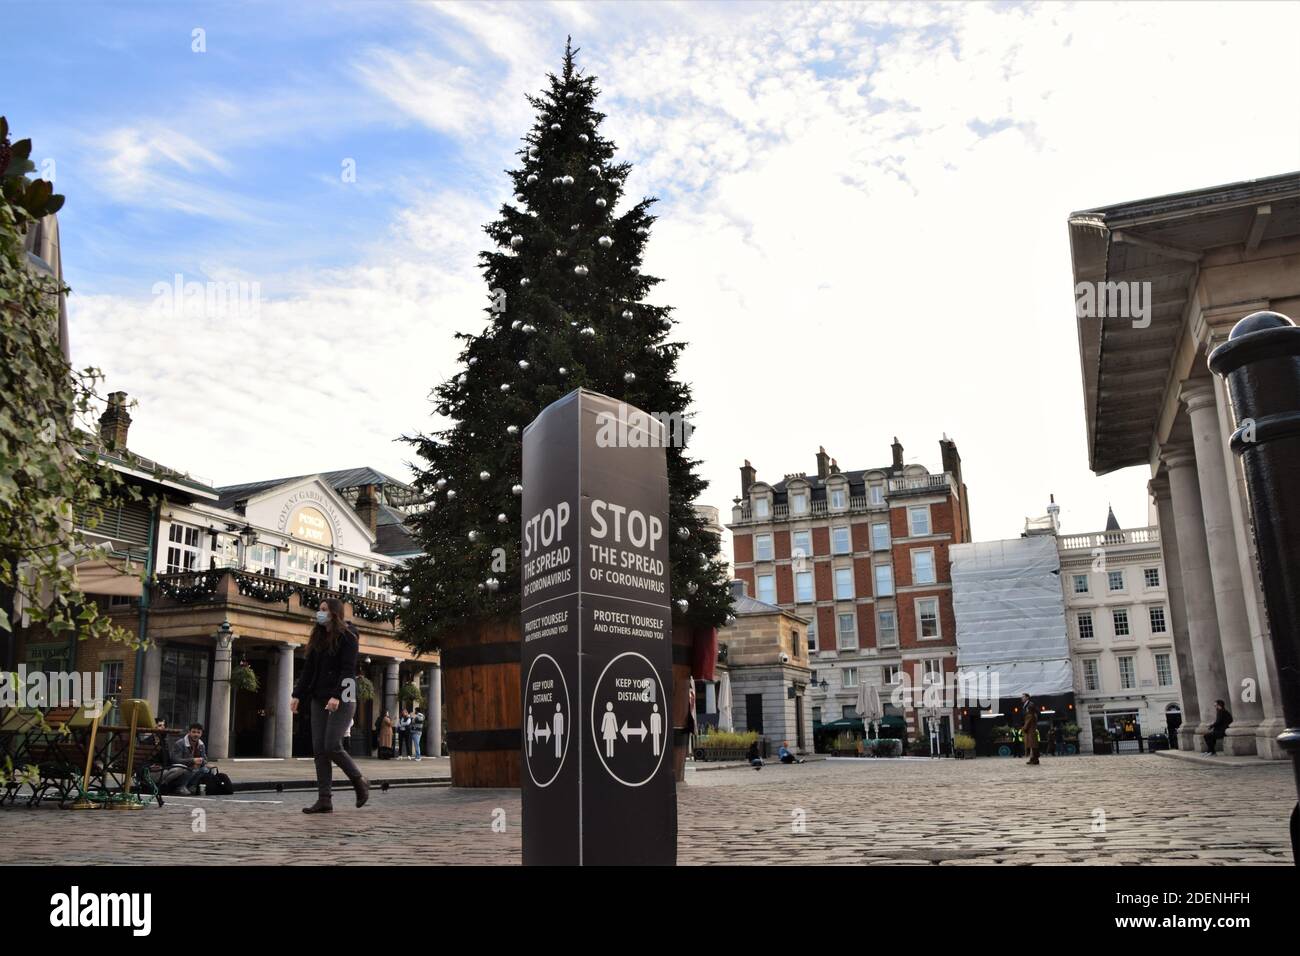 A woman wearing a protective face mask walks past a Stop The Spread Of Coronavirus sign and the Christmas tree in Covent Garden, London. Stock Photo